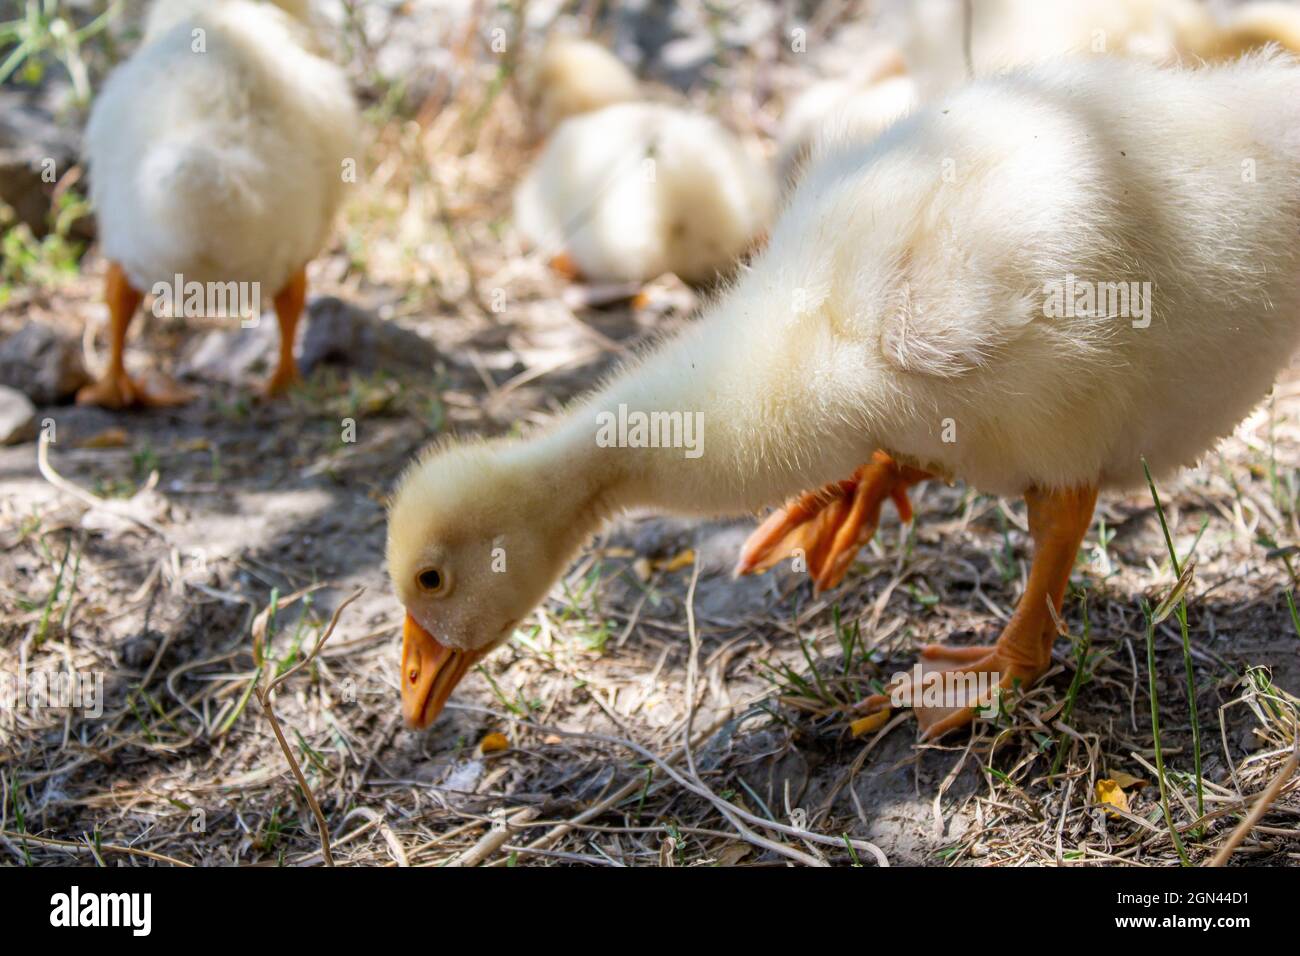 Baby goslings are looking something to eat. Closeup photo of baby geese. Stock Photo